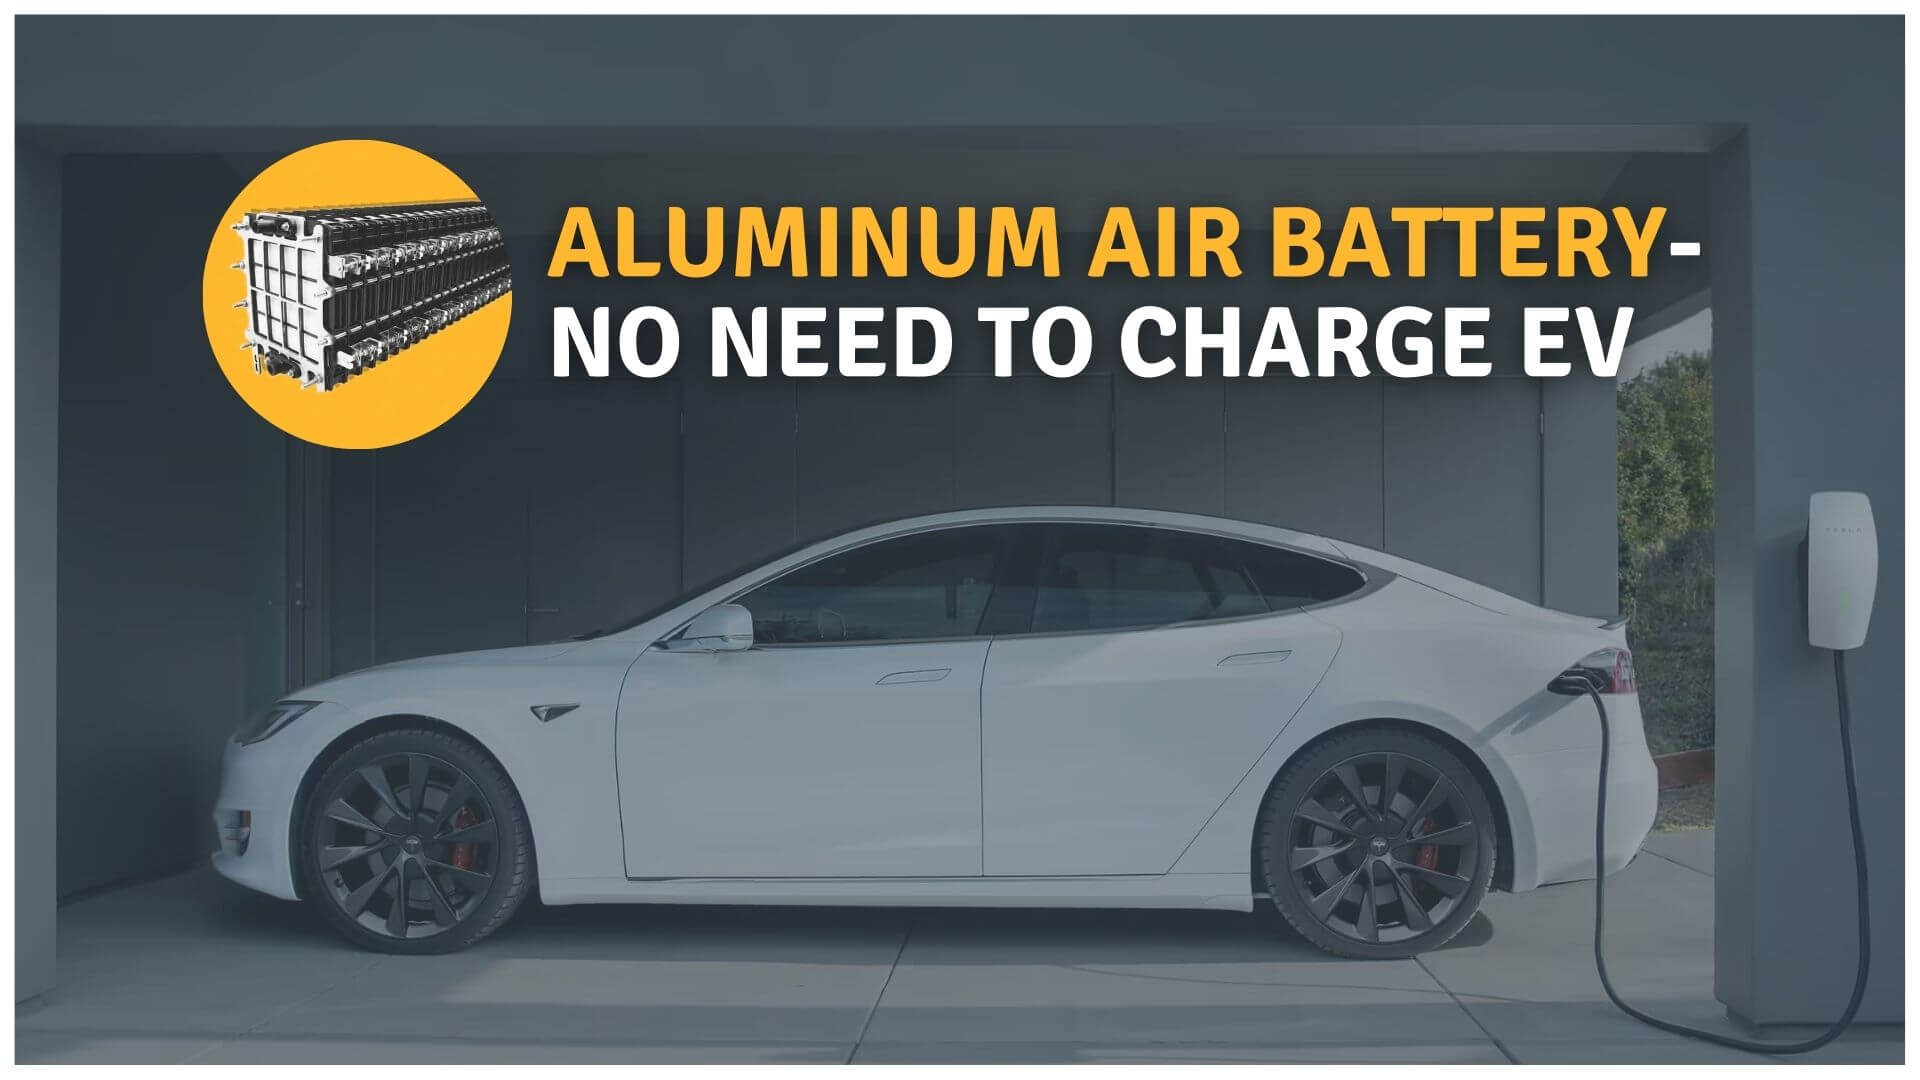 https://e-vehicleinfo.com/aluminum-air-battery-in-electric-vehicles-advantage-and-disadvantages/